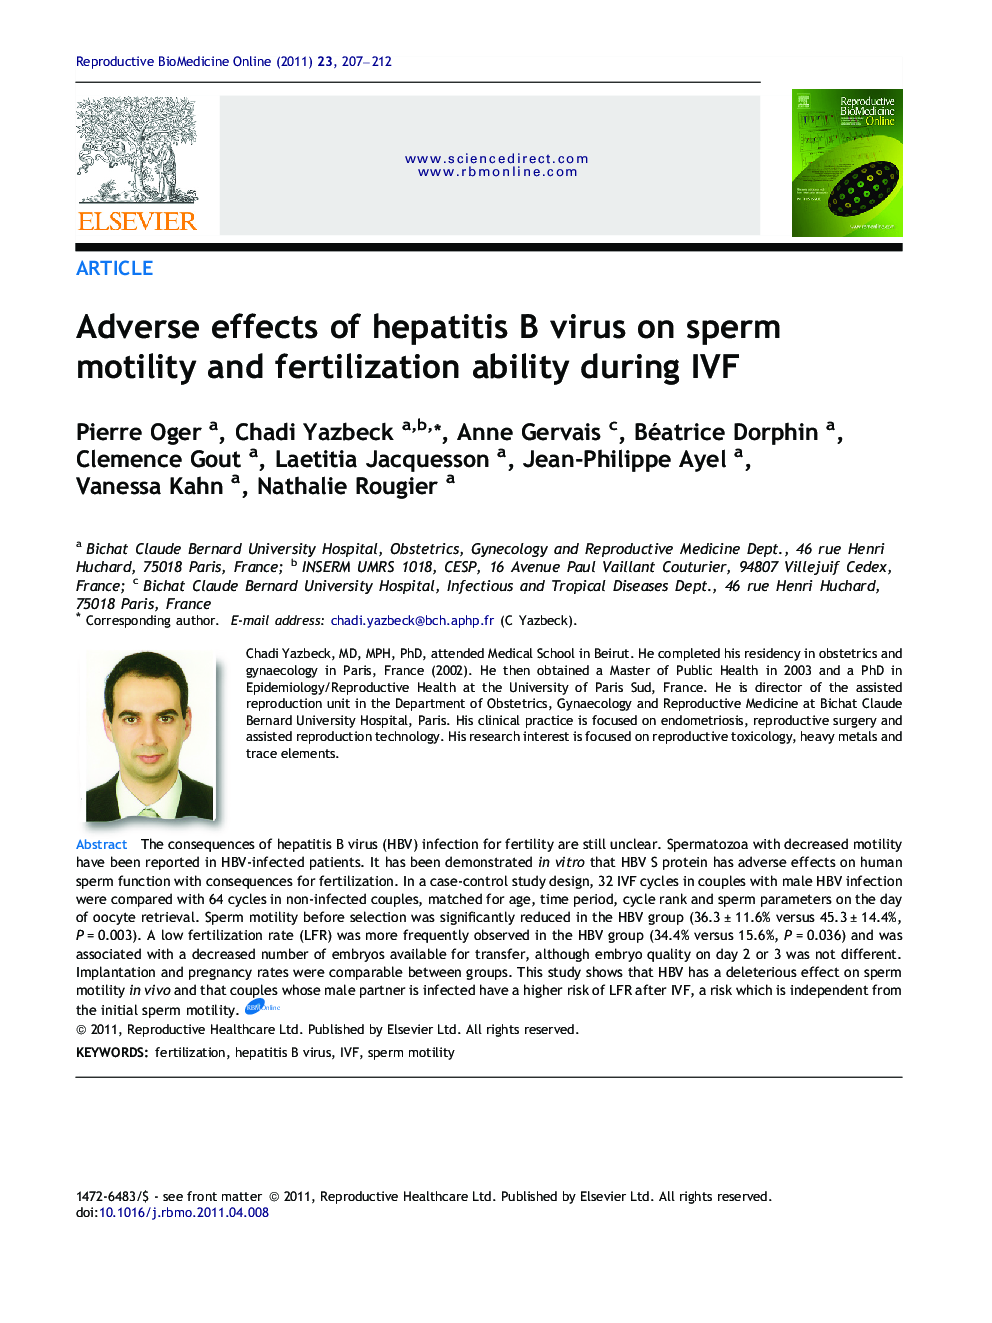 Adverse effects of hepatitis B virus on sperm motility and fertilization ability during IVF